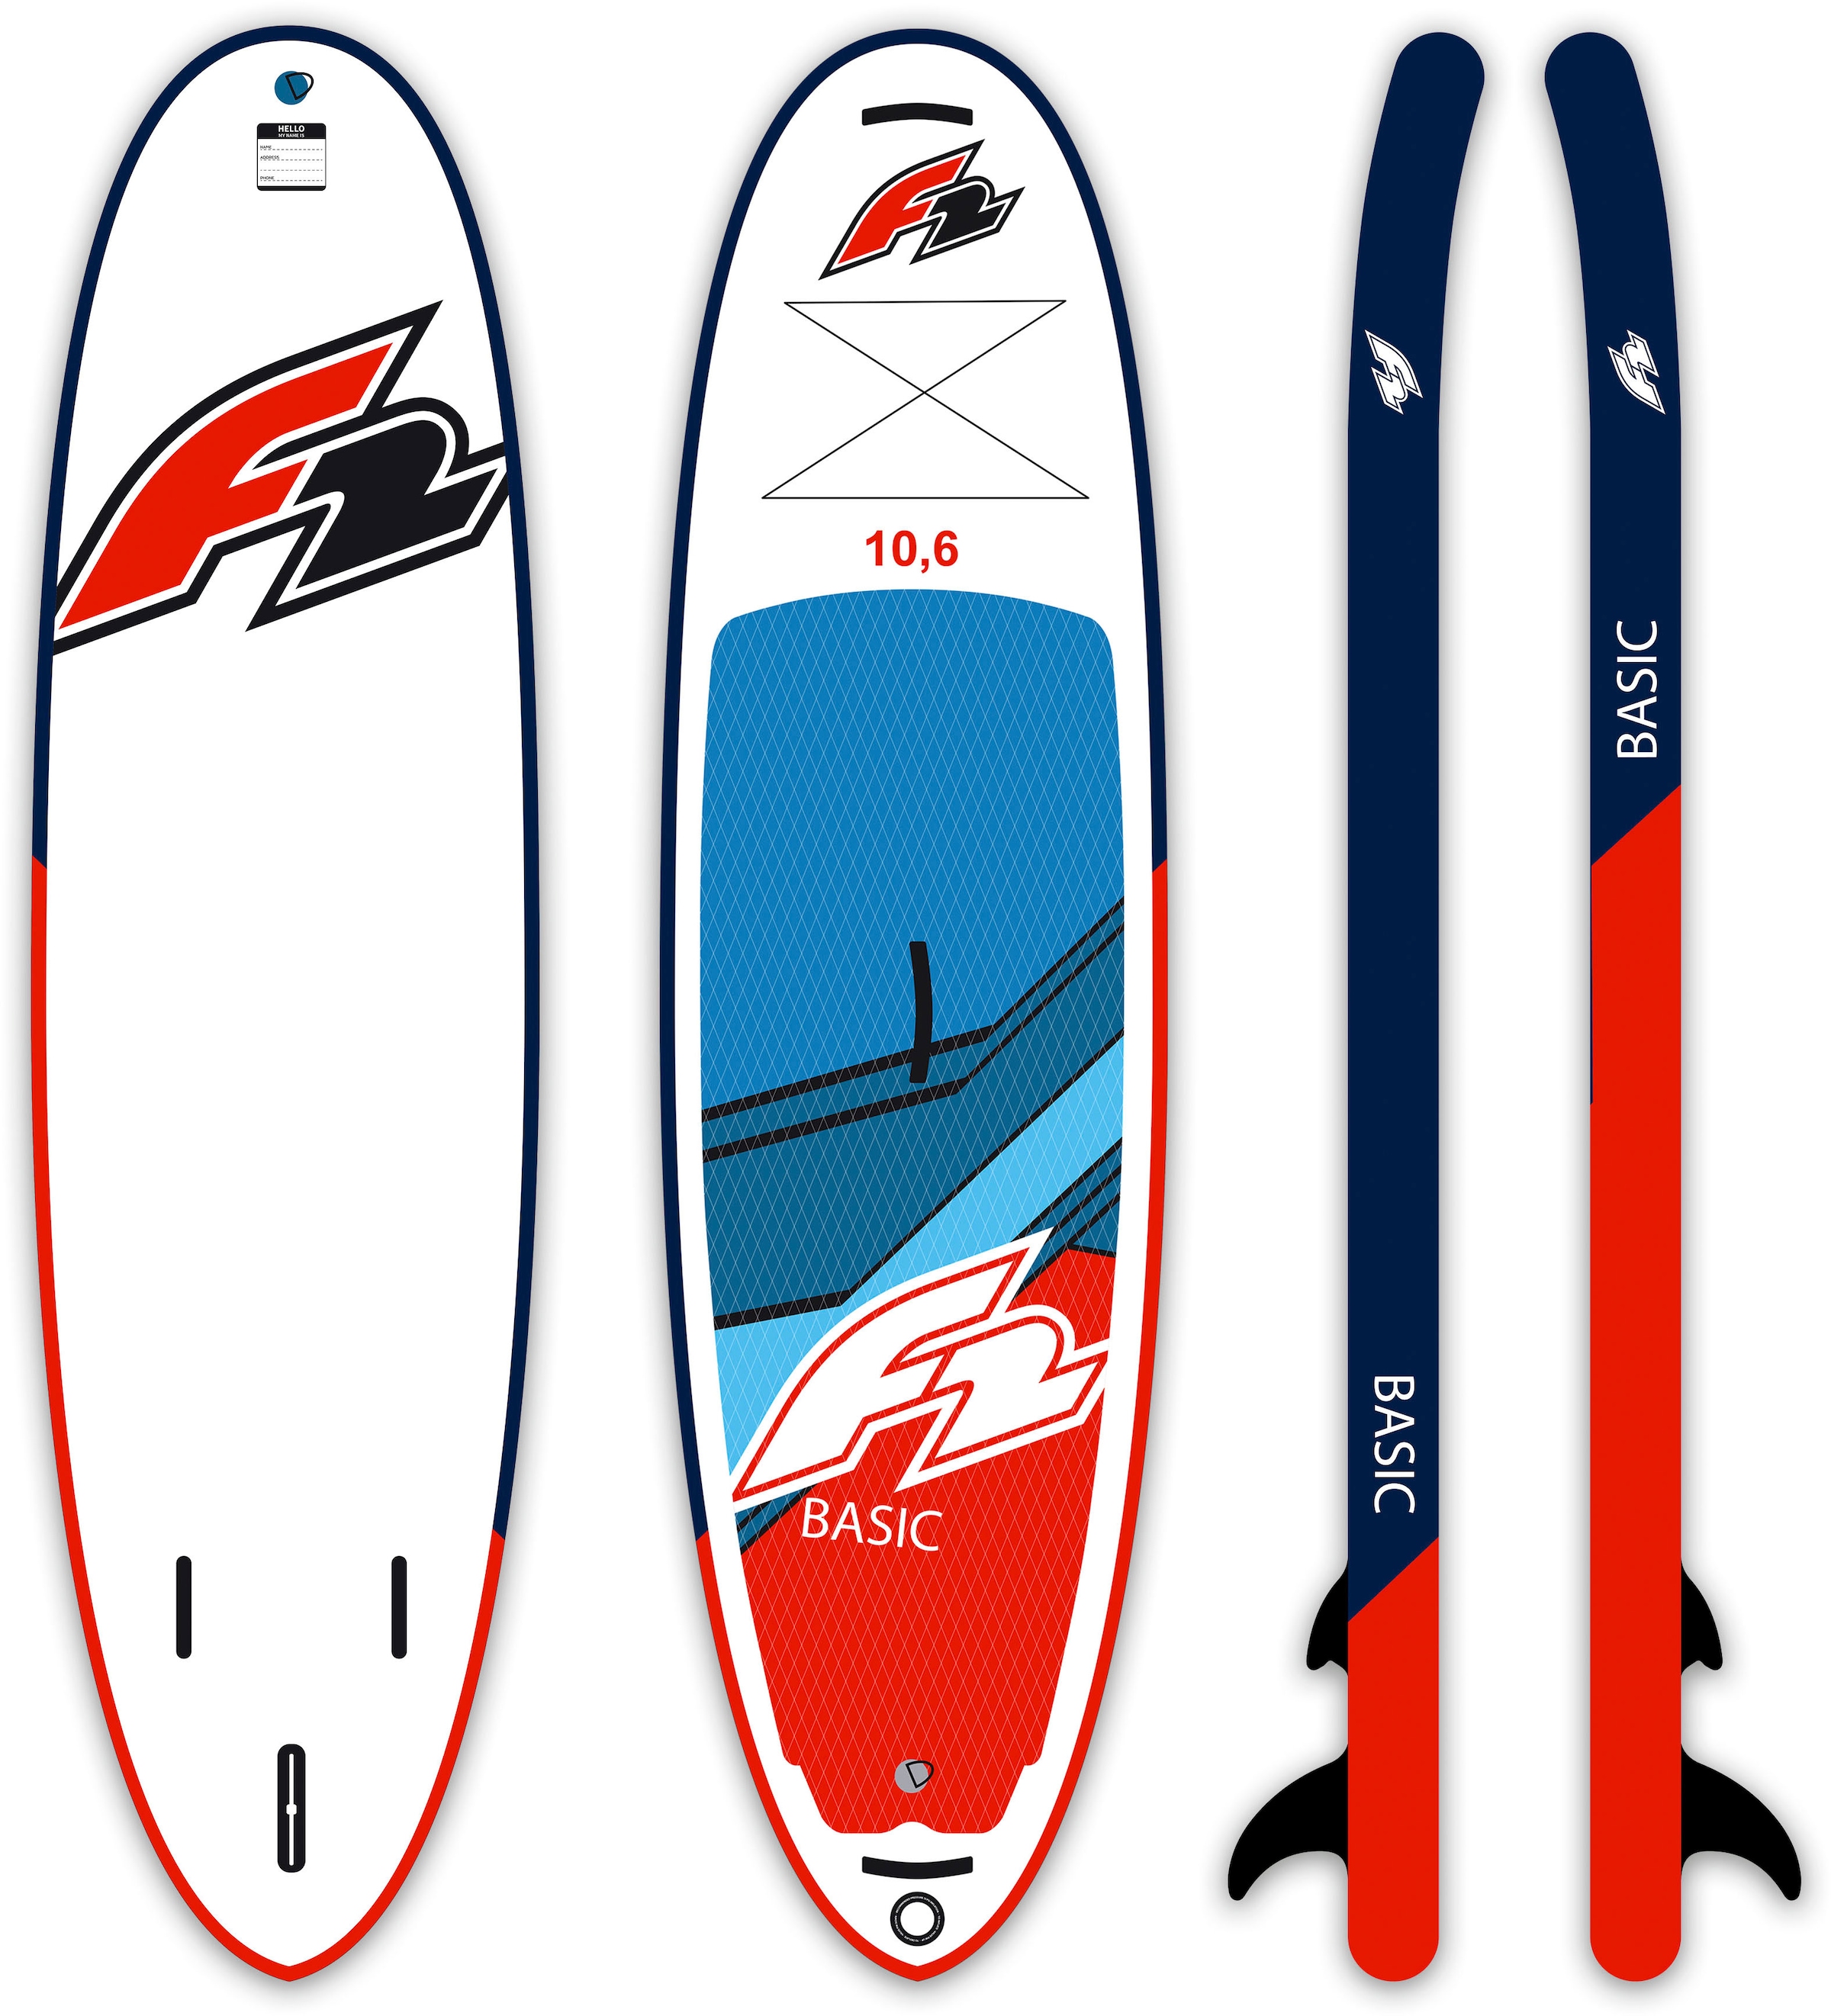 inkl. Inflatable 6 (Set, Rund-/Windsegel) »Basic tlg., SUP-Board 10,6 bei red«, Roundsail F2 F2